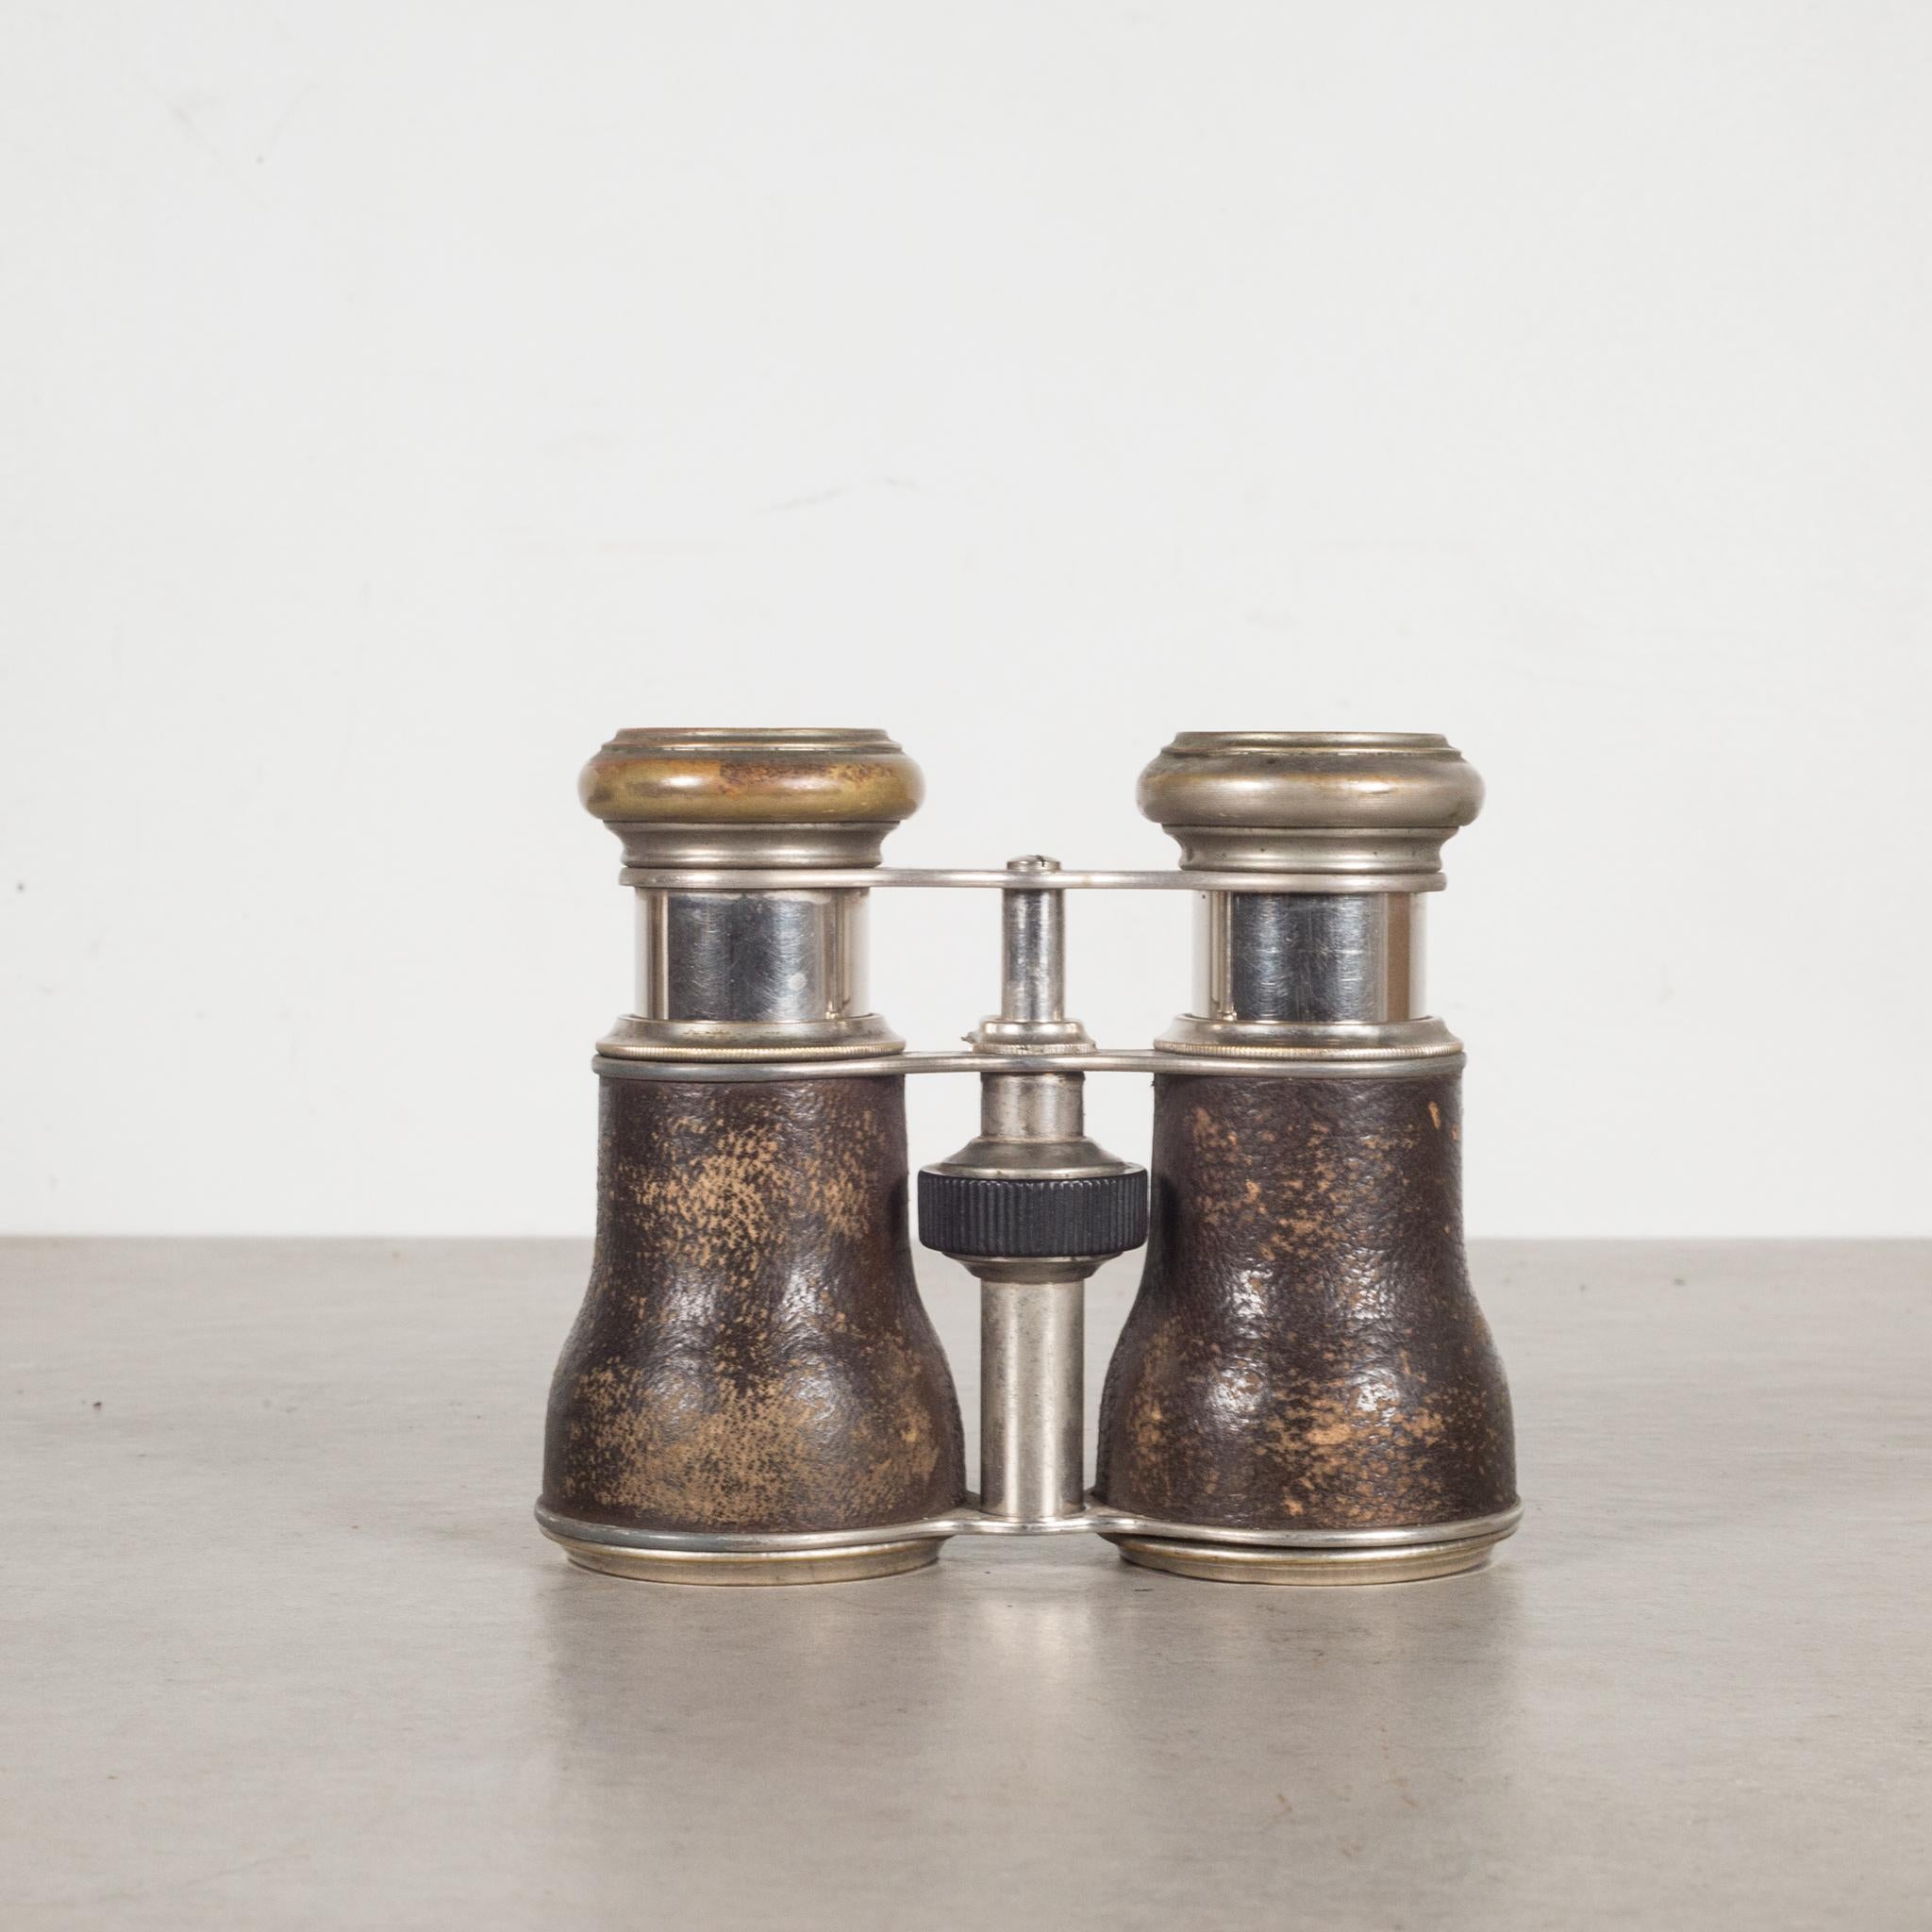 About

An original pair of leather and chrome field binoculars with original leather case. 